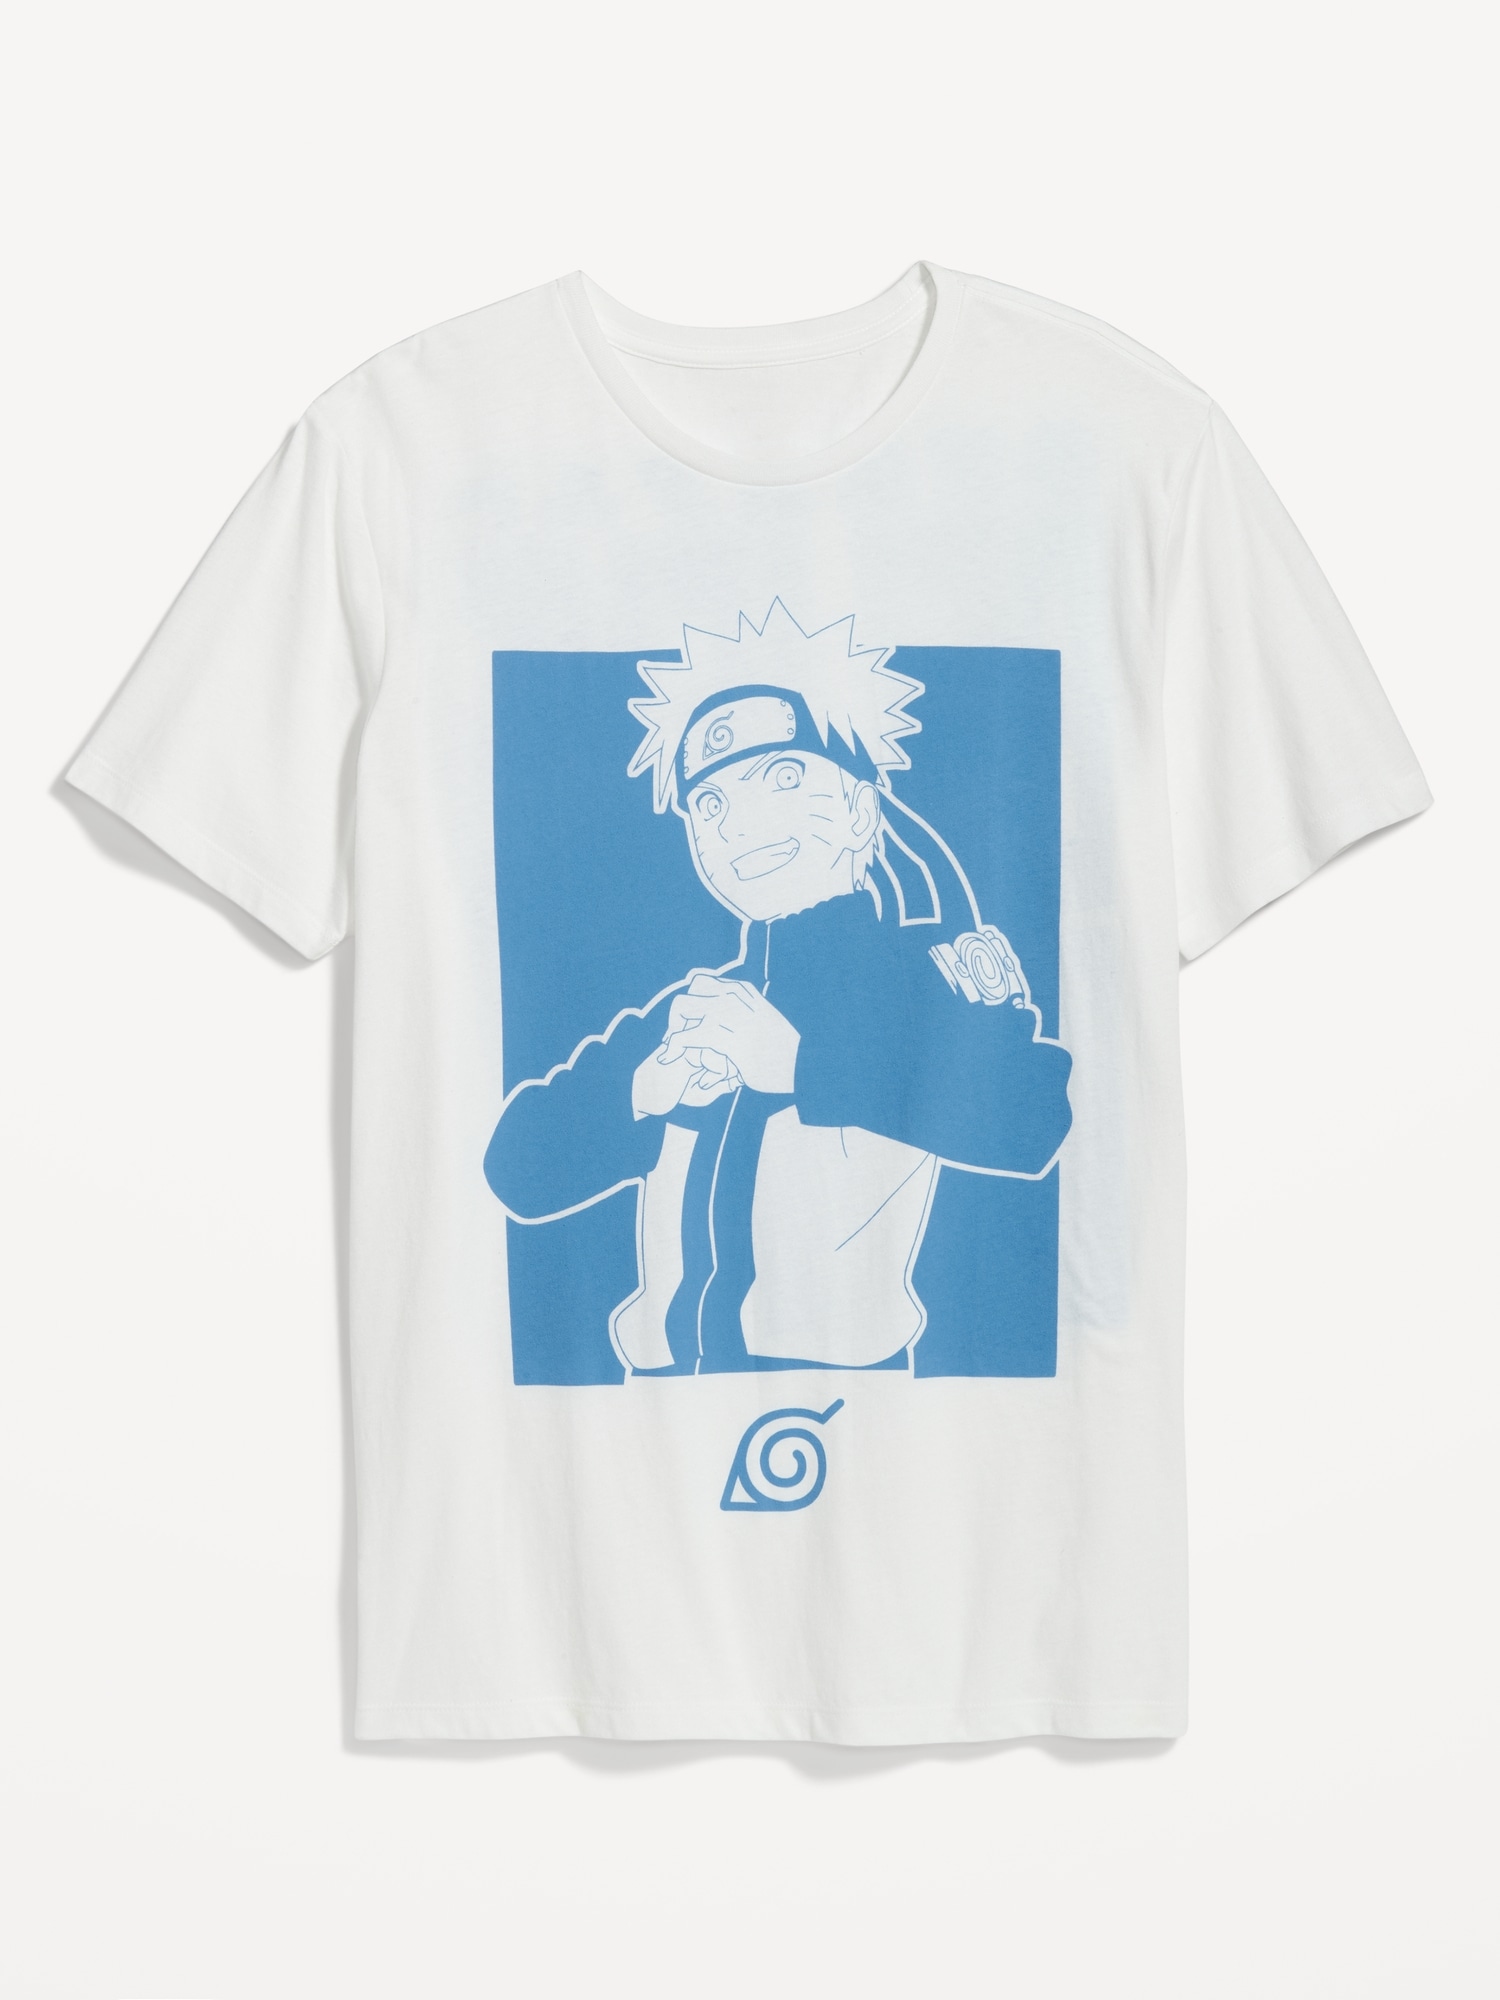 Naruto Gender-Neutral T-Shirt for Adults